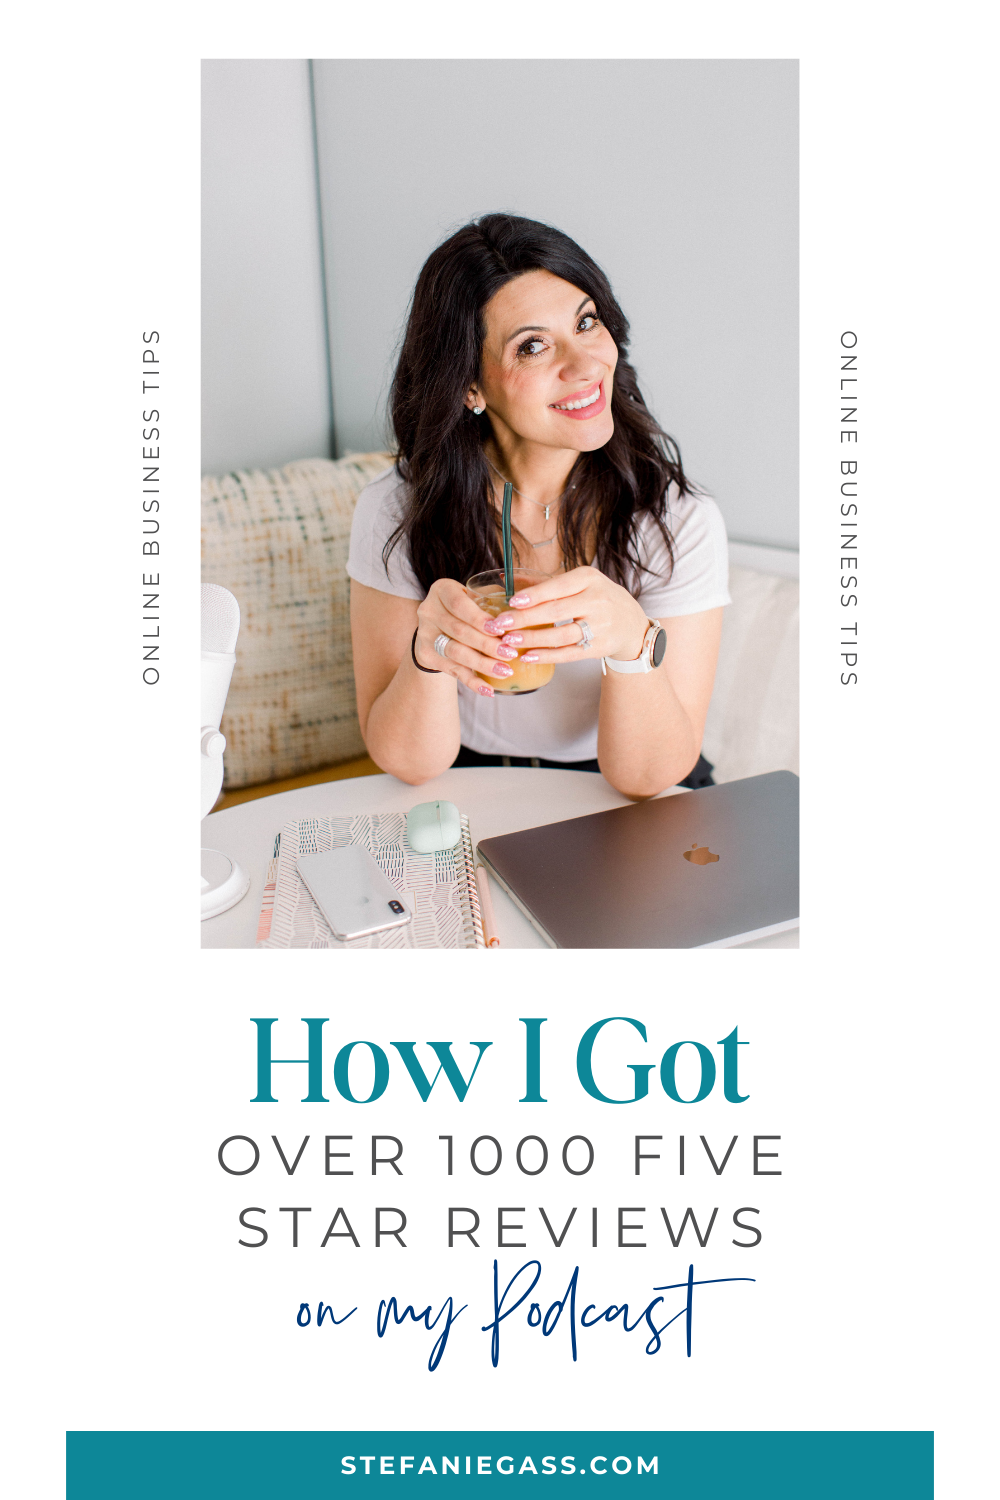 brown haired woman smiling, sitting at a table holding a drink.  Text says "How I got over 1000 five star reviews  on my podcast